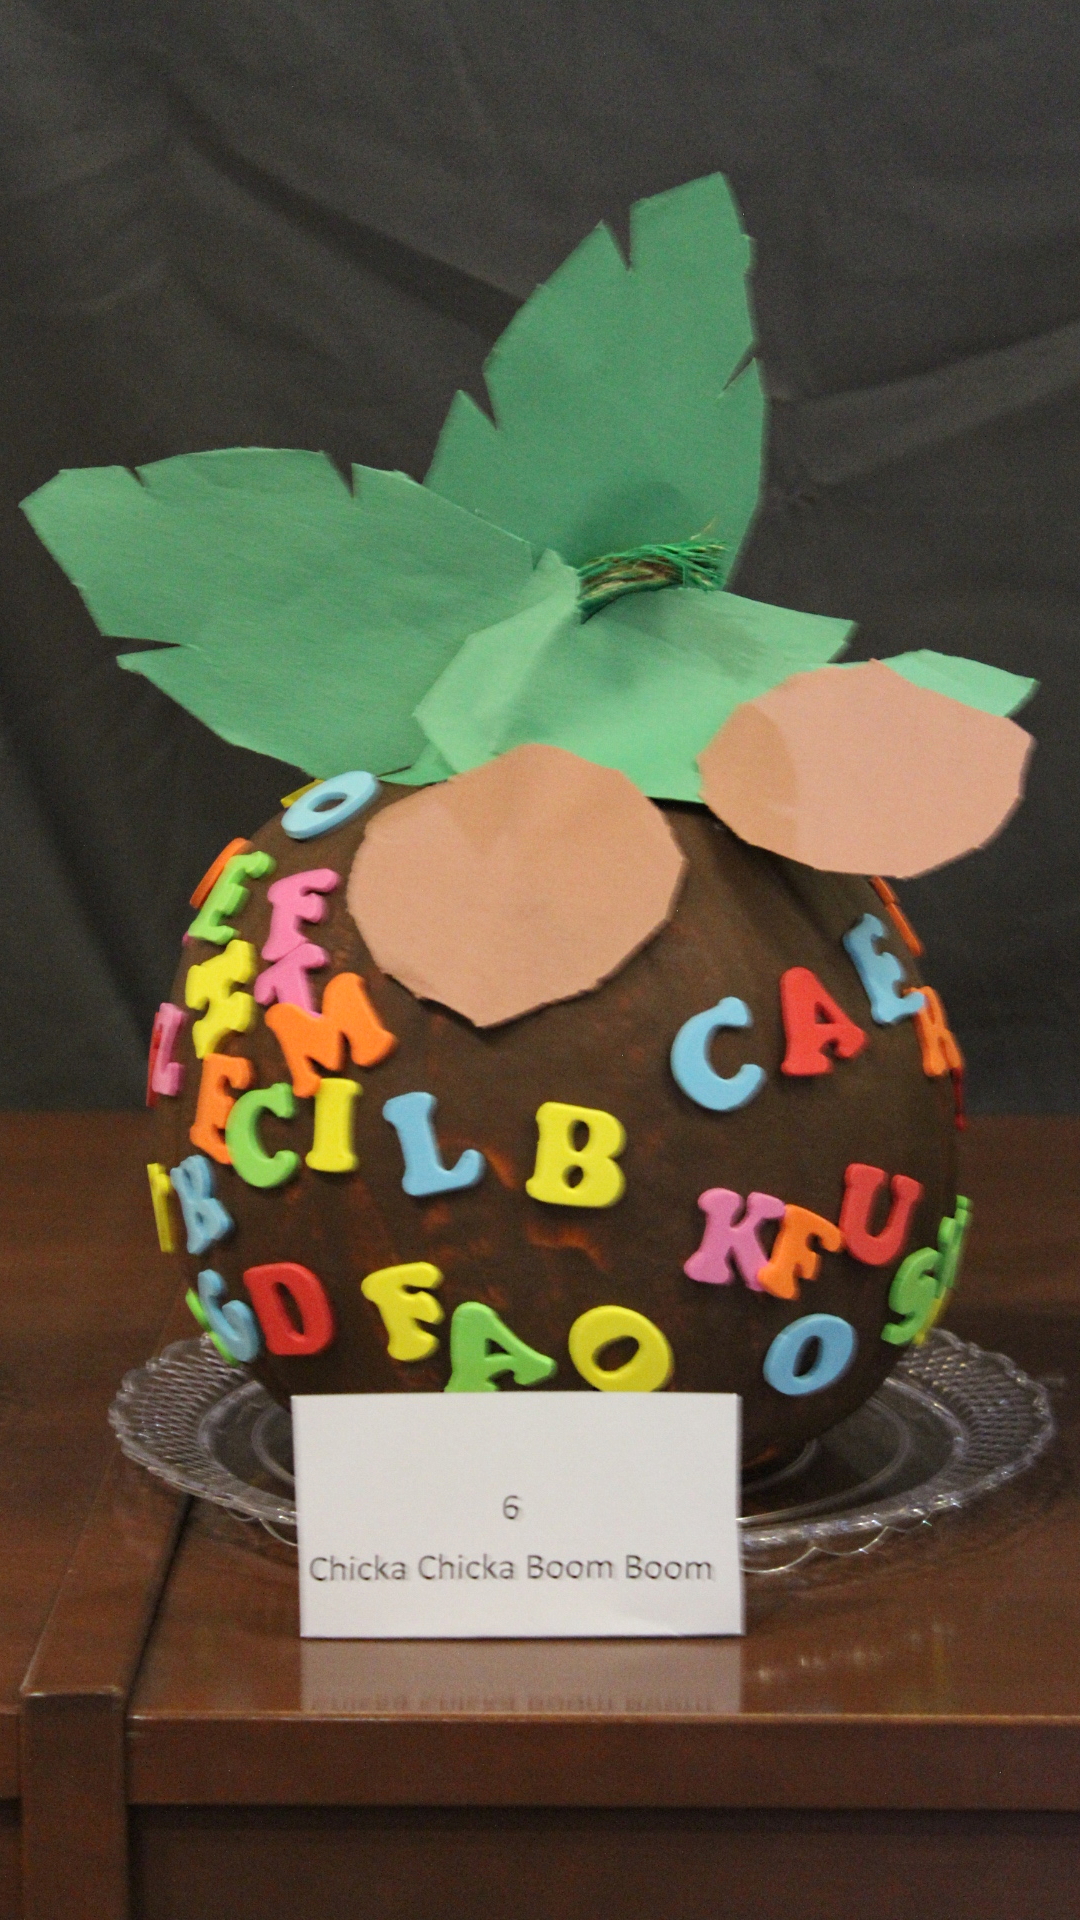 Pumpkin decorated as coconut covered in letters from "Chicka Chicka Boom Boom"